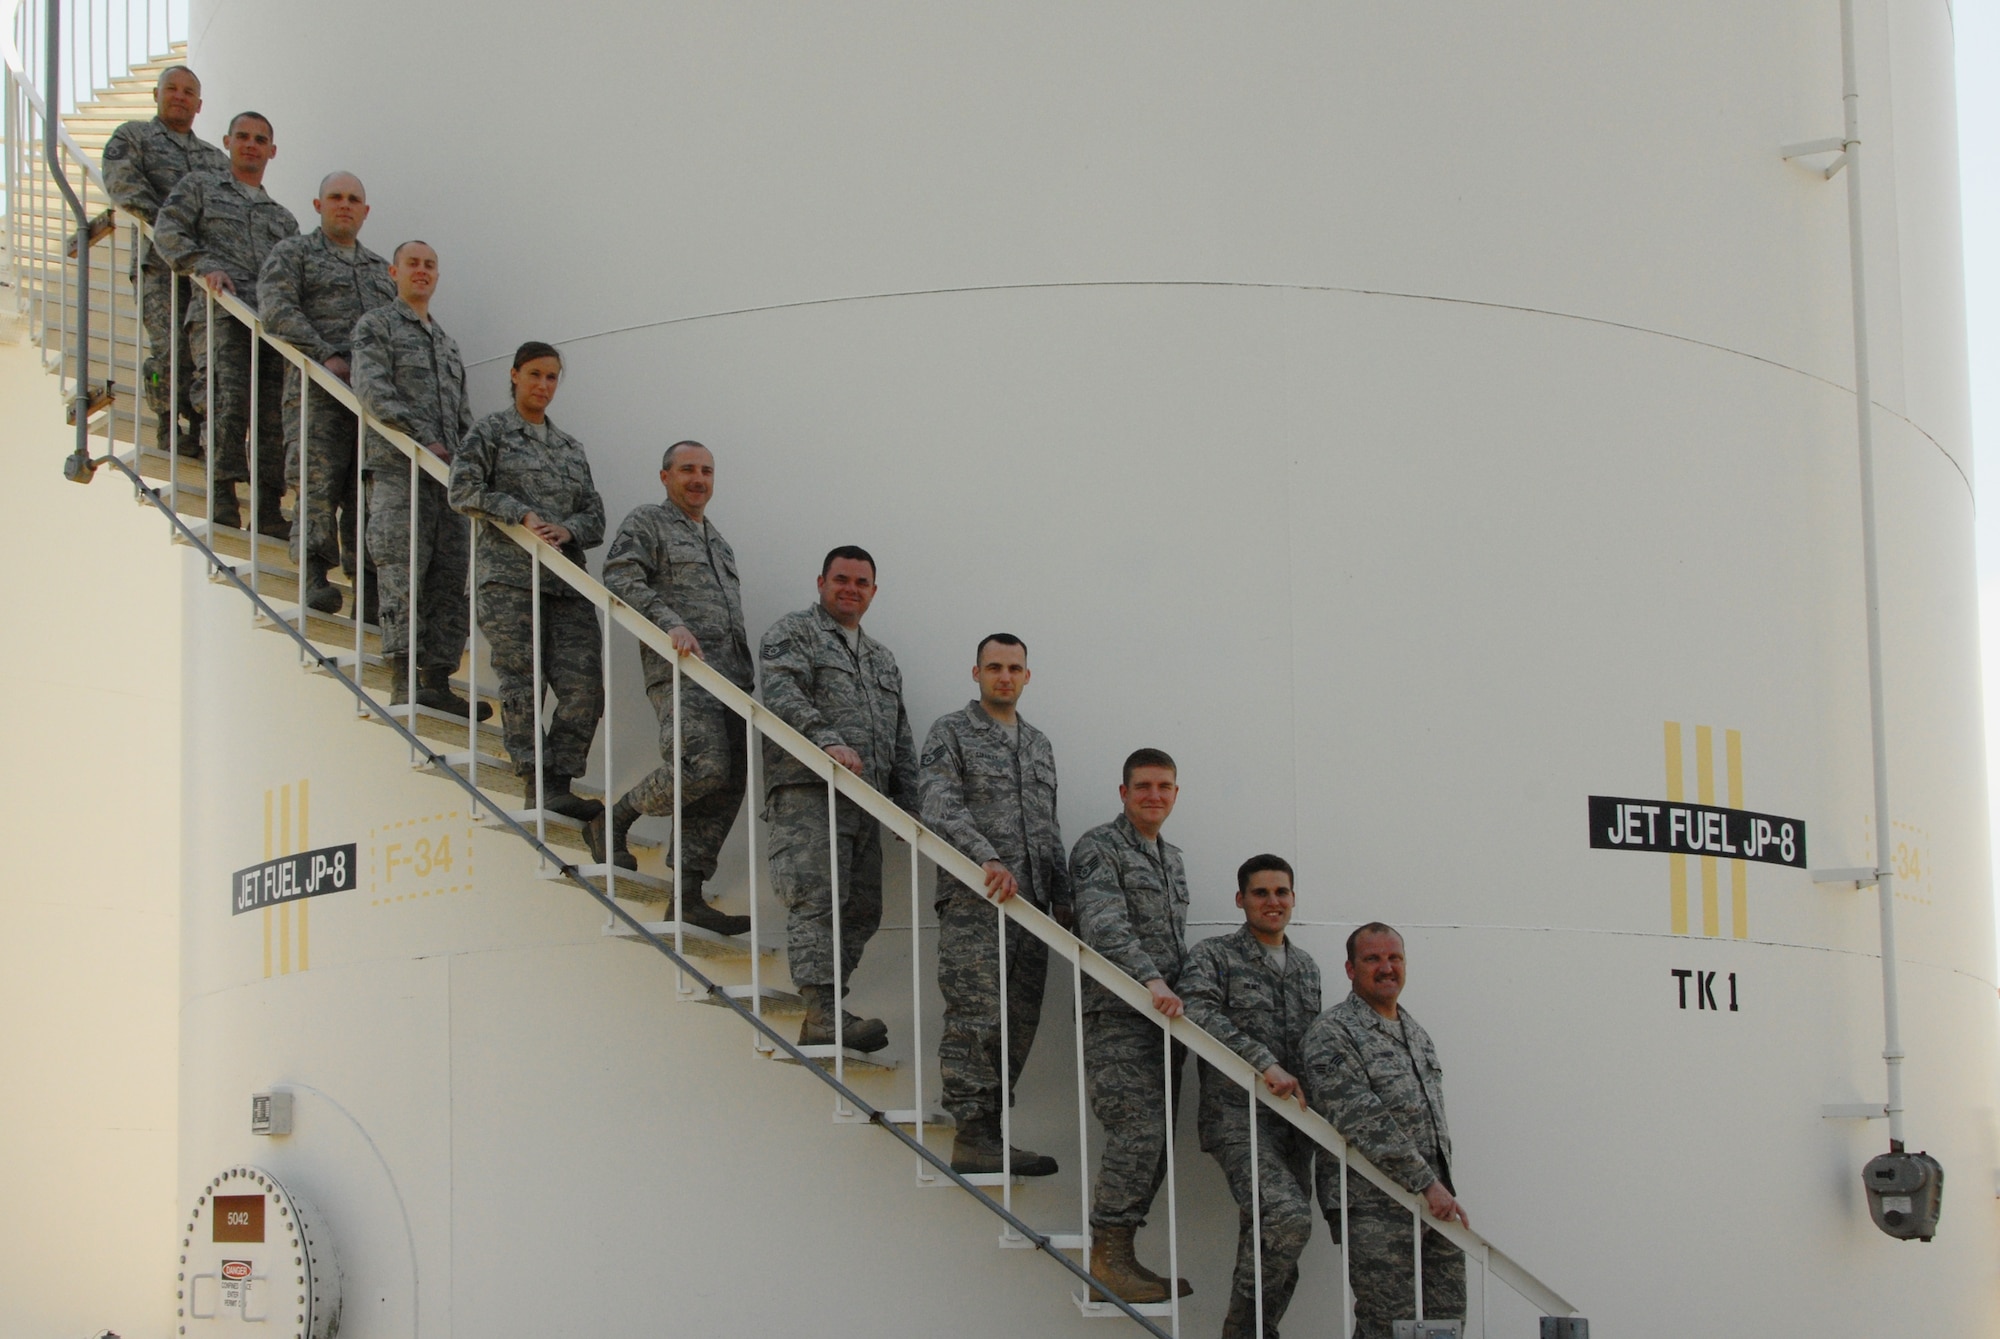 The 126th Fuels Management flight, 126th Air Refueling Wing, Illinois Air National Guard, Scott Air Force Base, Ill., was recently named “The Best in the Air National Guard” for its field. (U.S. Air Force photo by MSgt Ken Stephens) (Released)